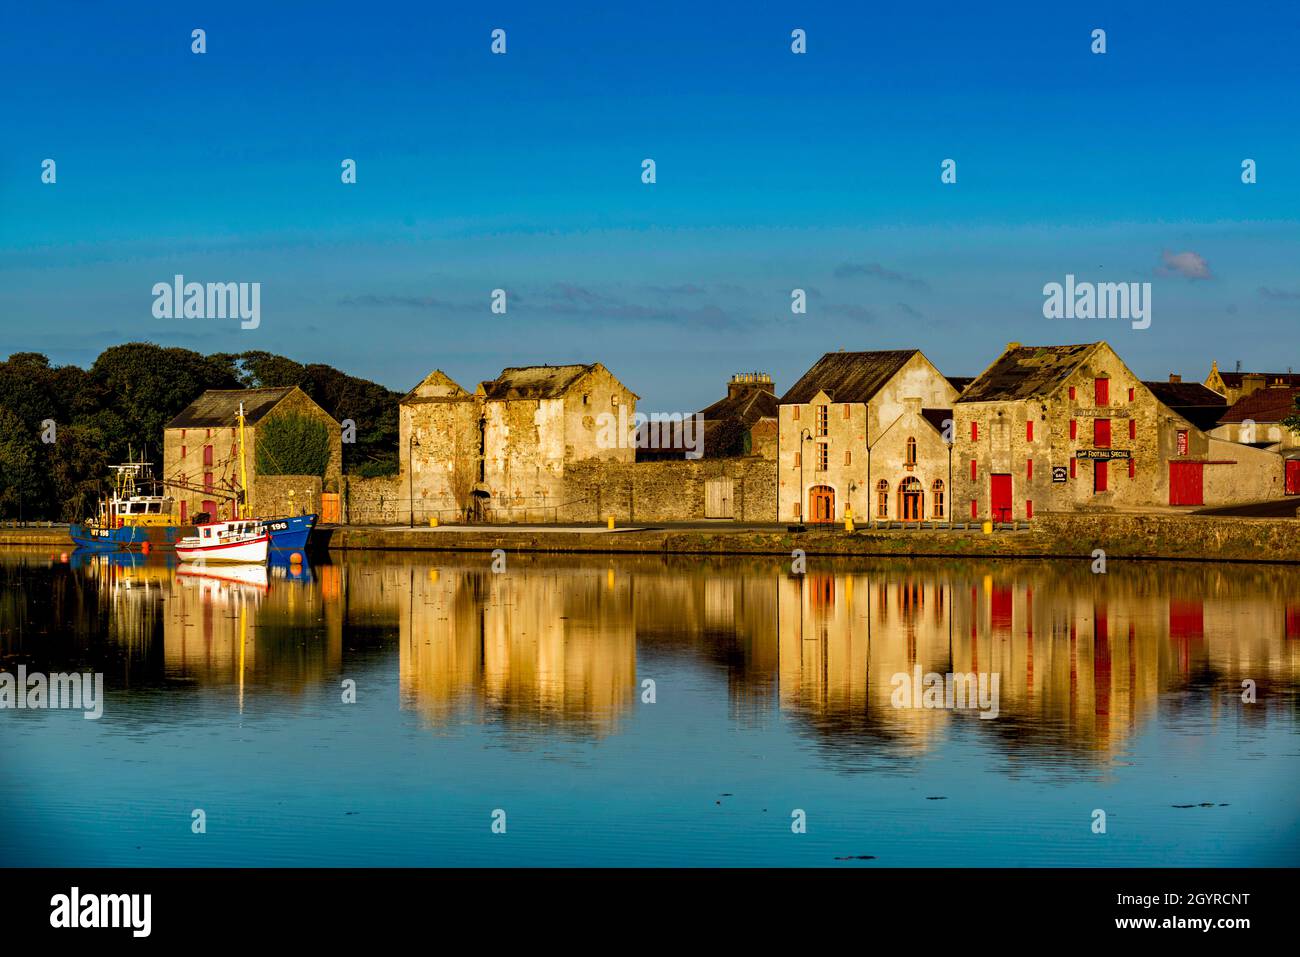 Warehouses on the river Lennon in Rathmelton, County Donegal, Ireland Stock Photo